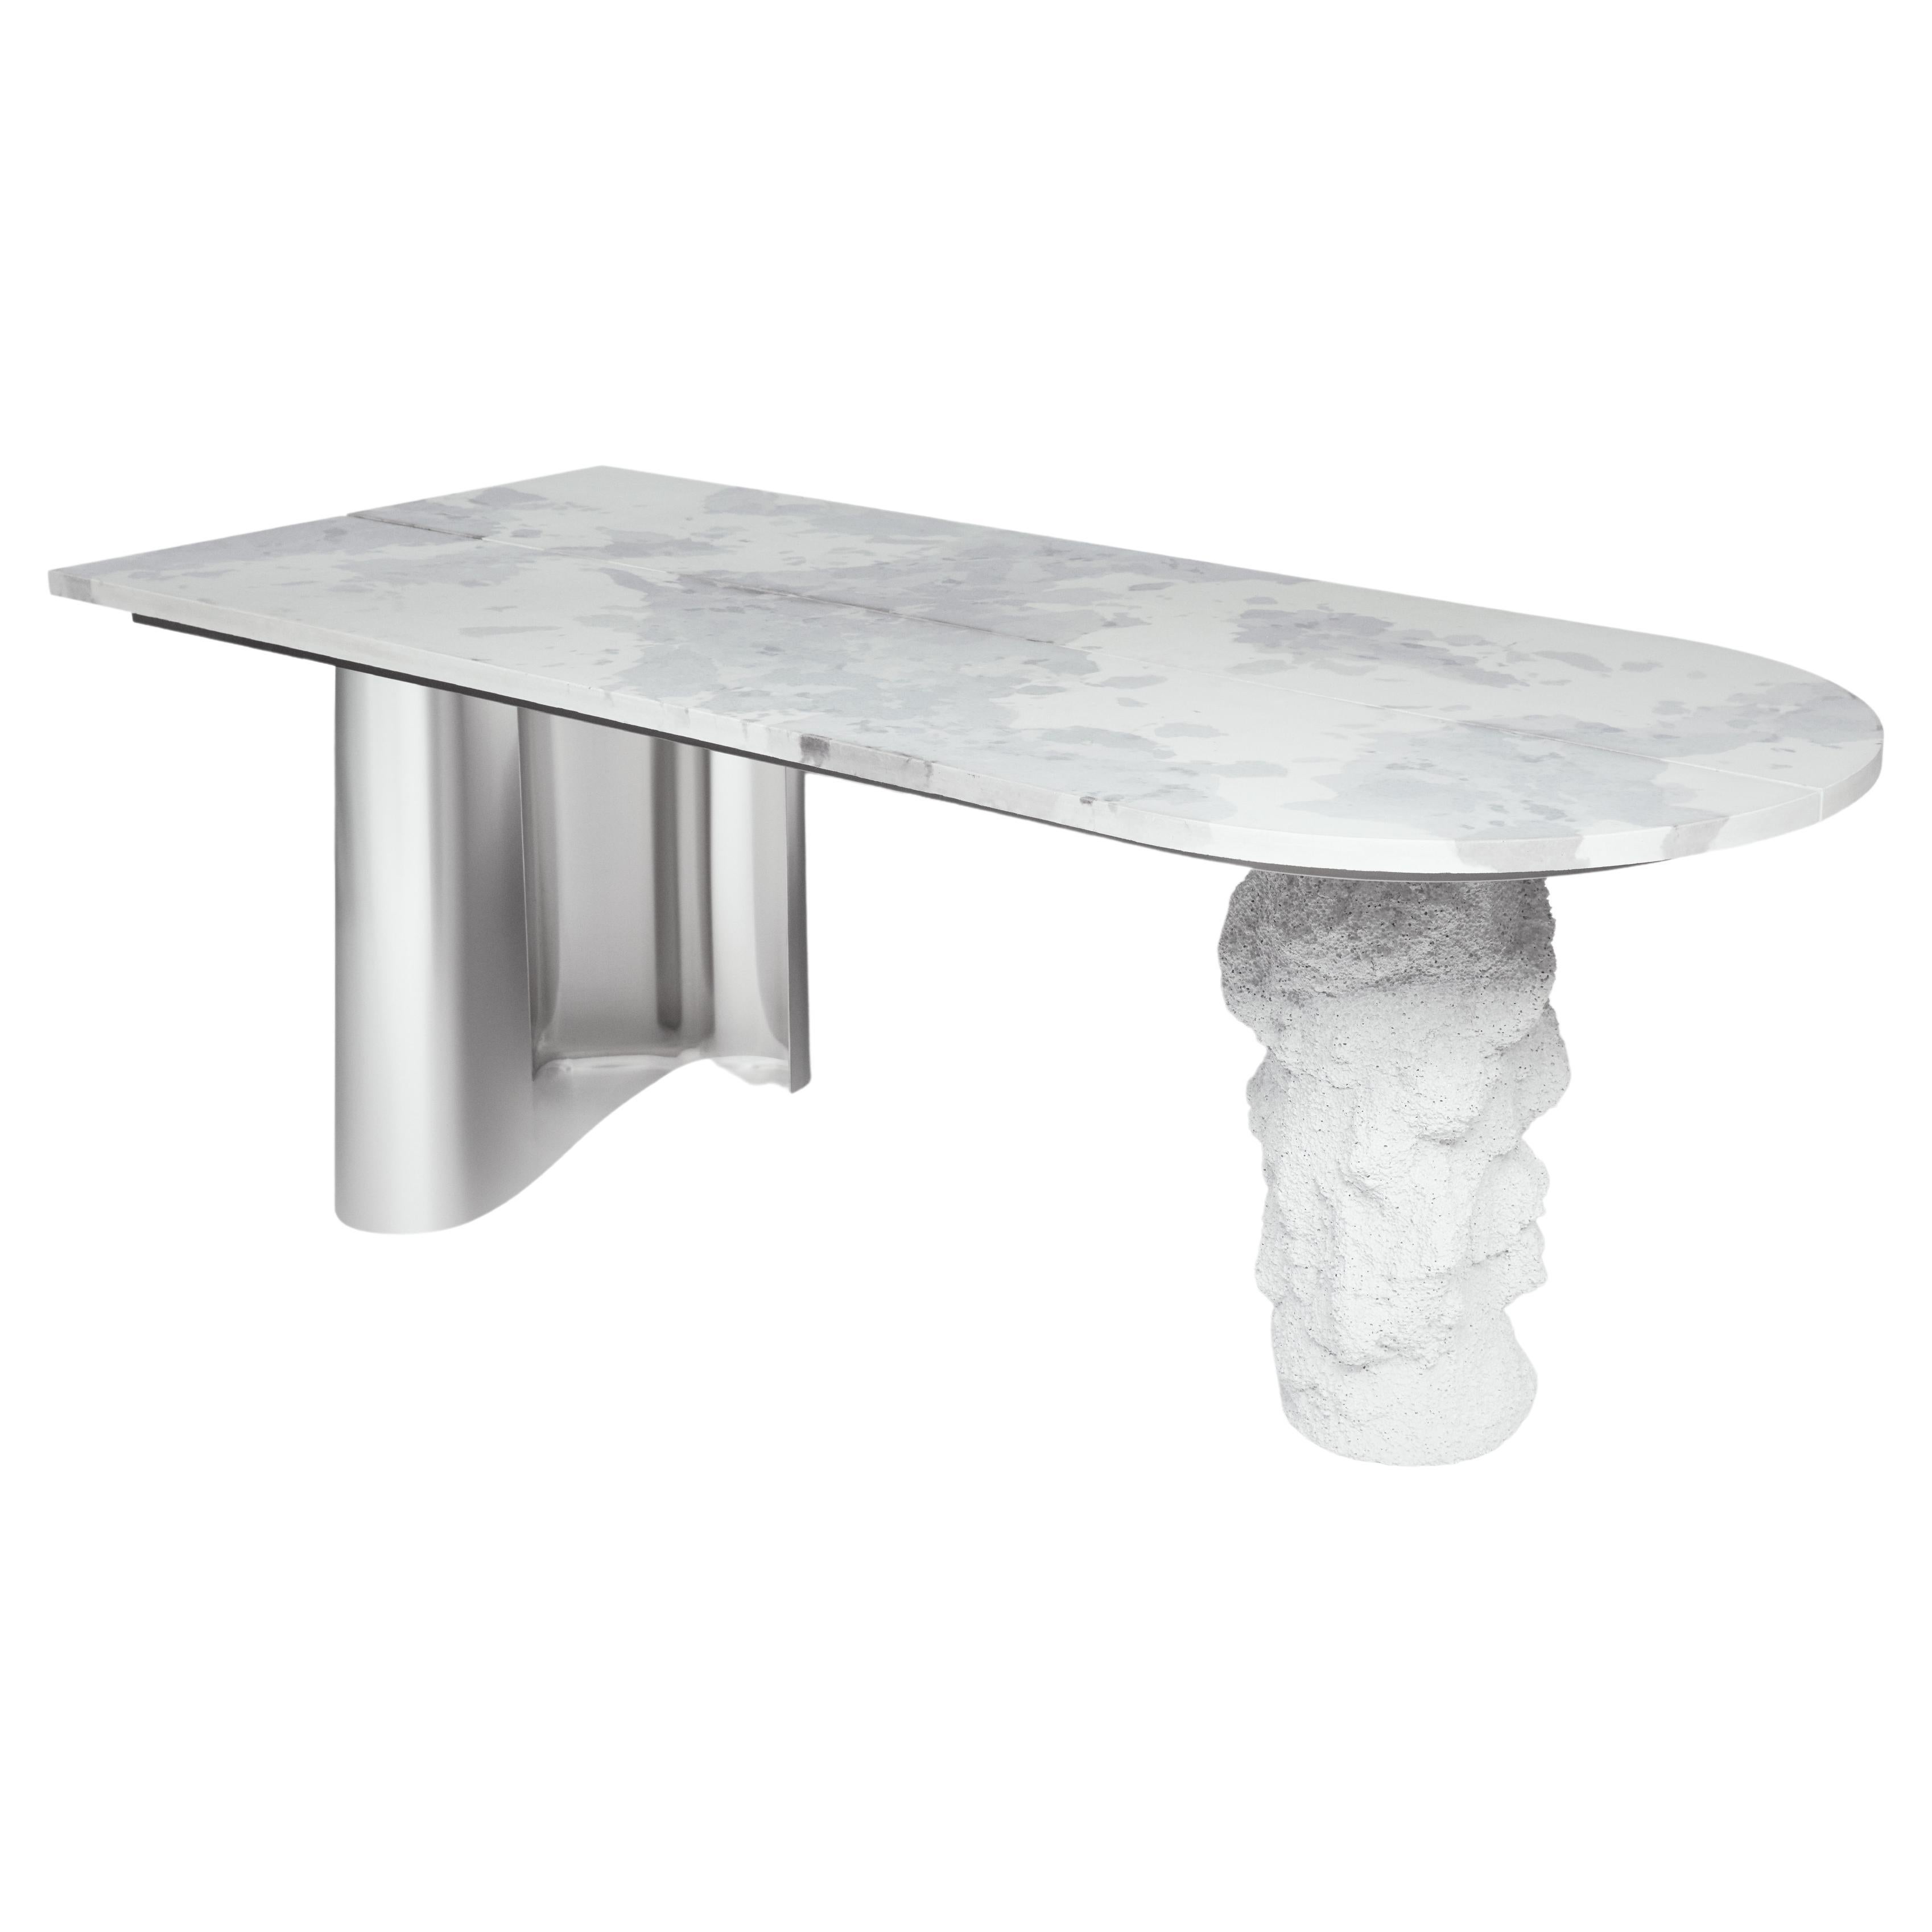 Your Private Sky Table, sculptural table For Sale